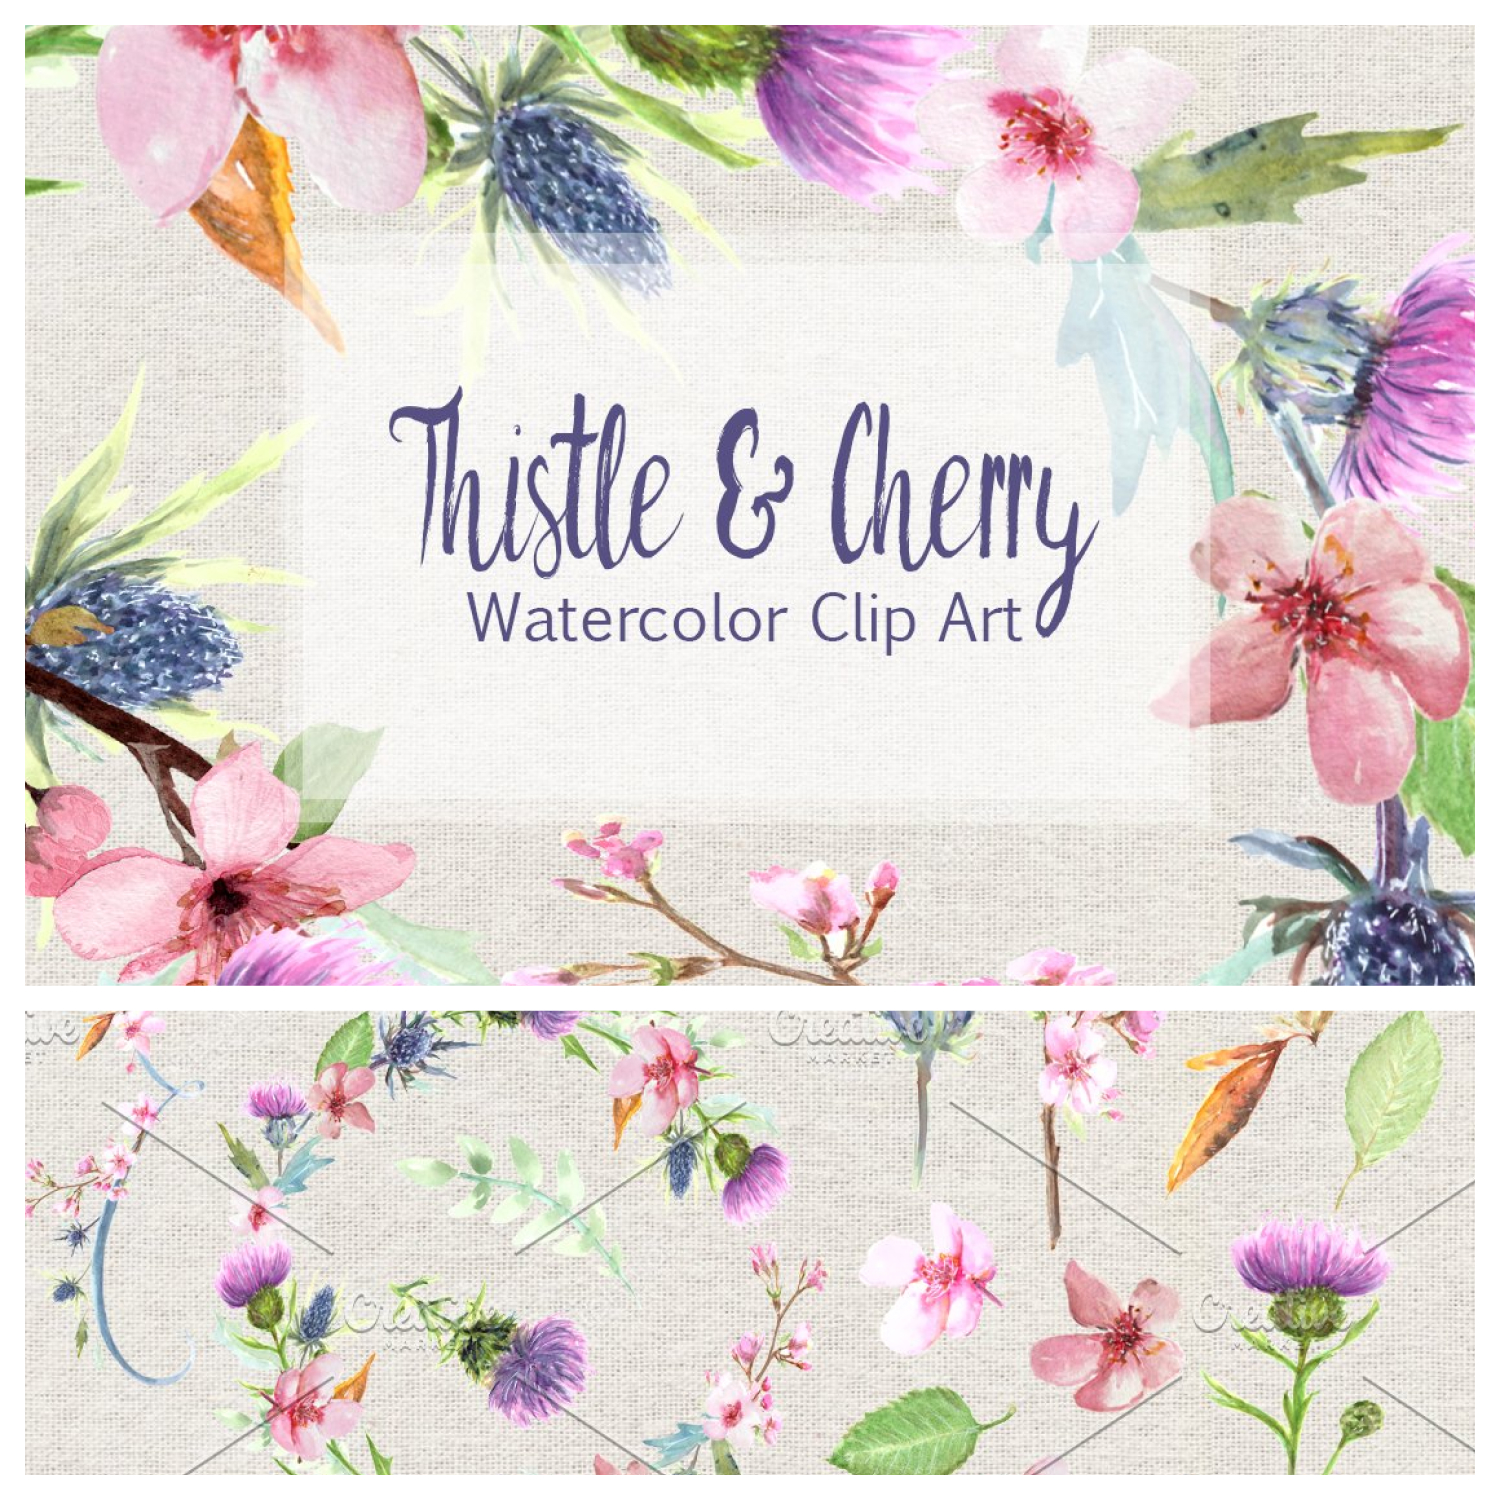 Preview on fabric background with flowers images.